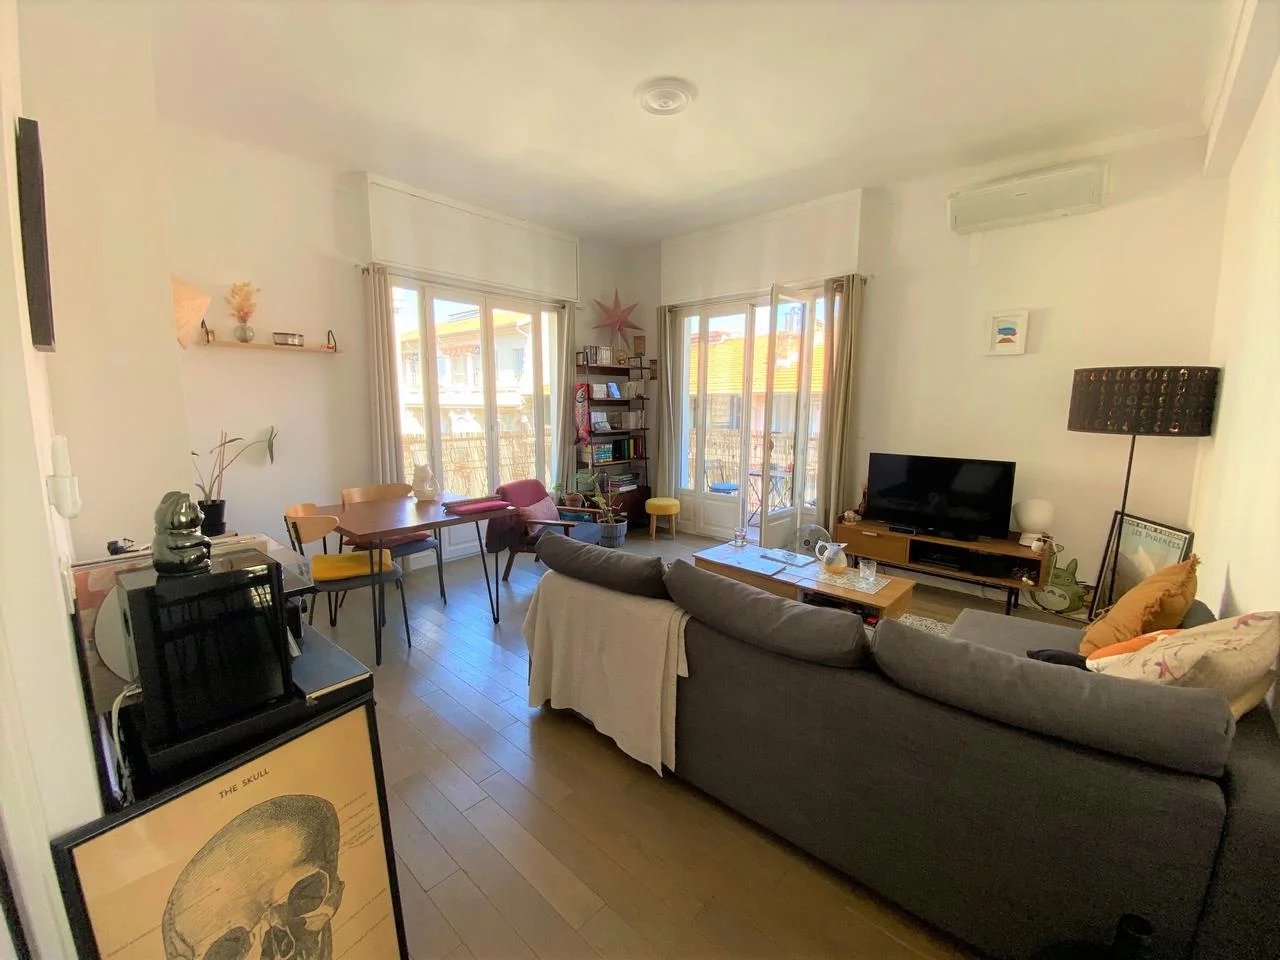 Appartement  2 Rooms 53m2  for sale   398 000 €